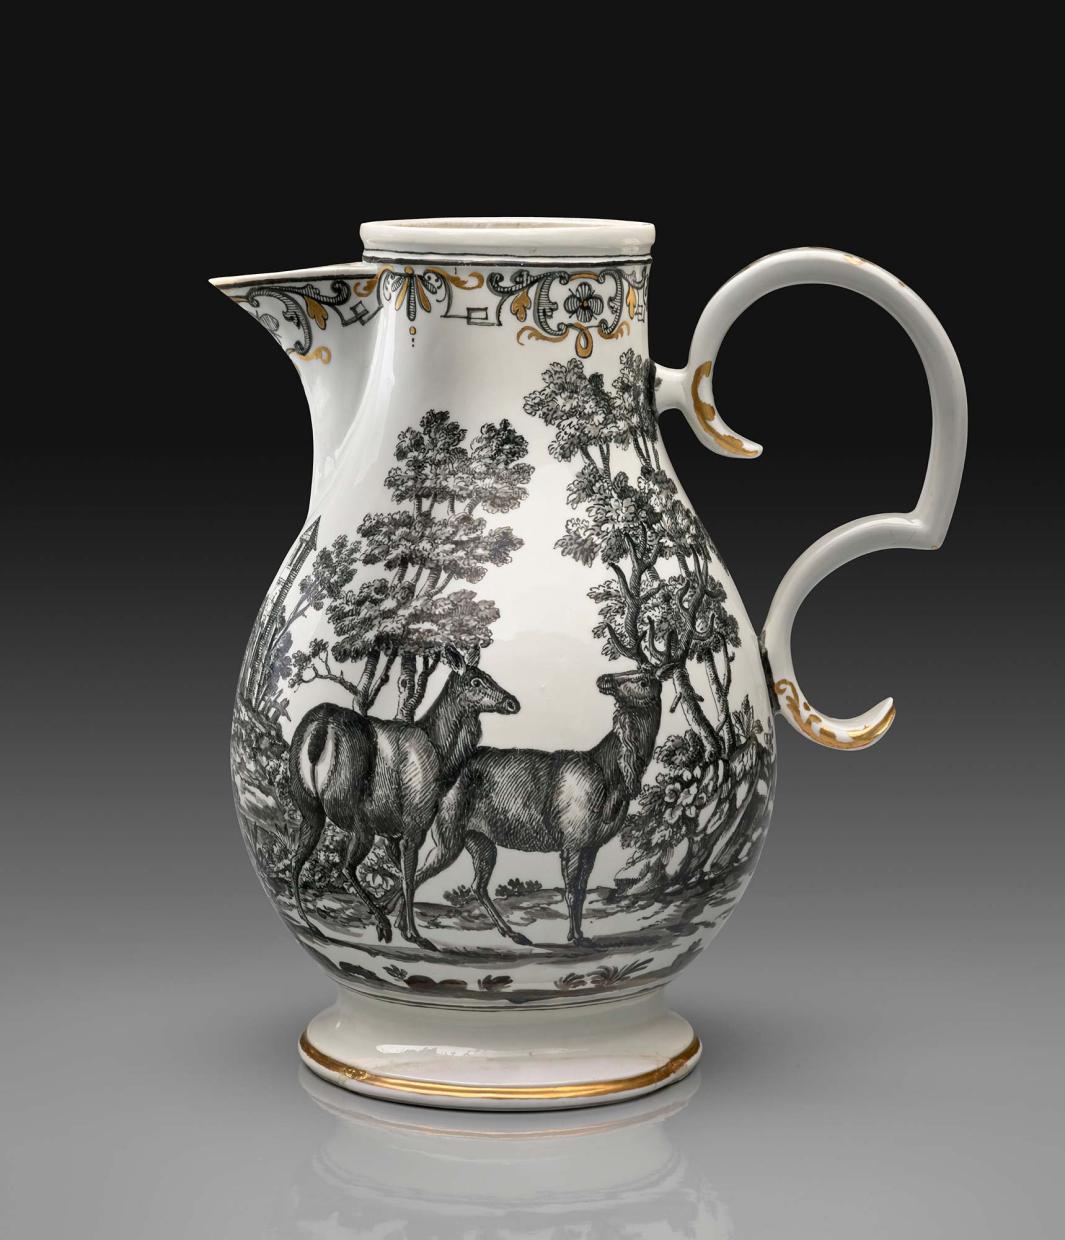 porcelain coffeepot or jug with deer illustrated